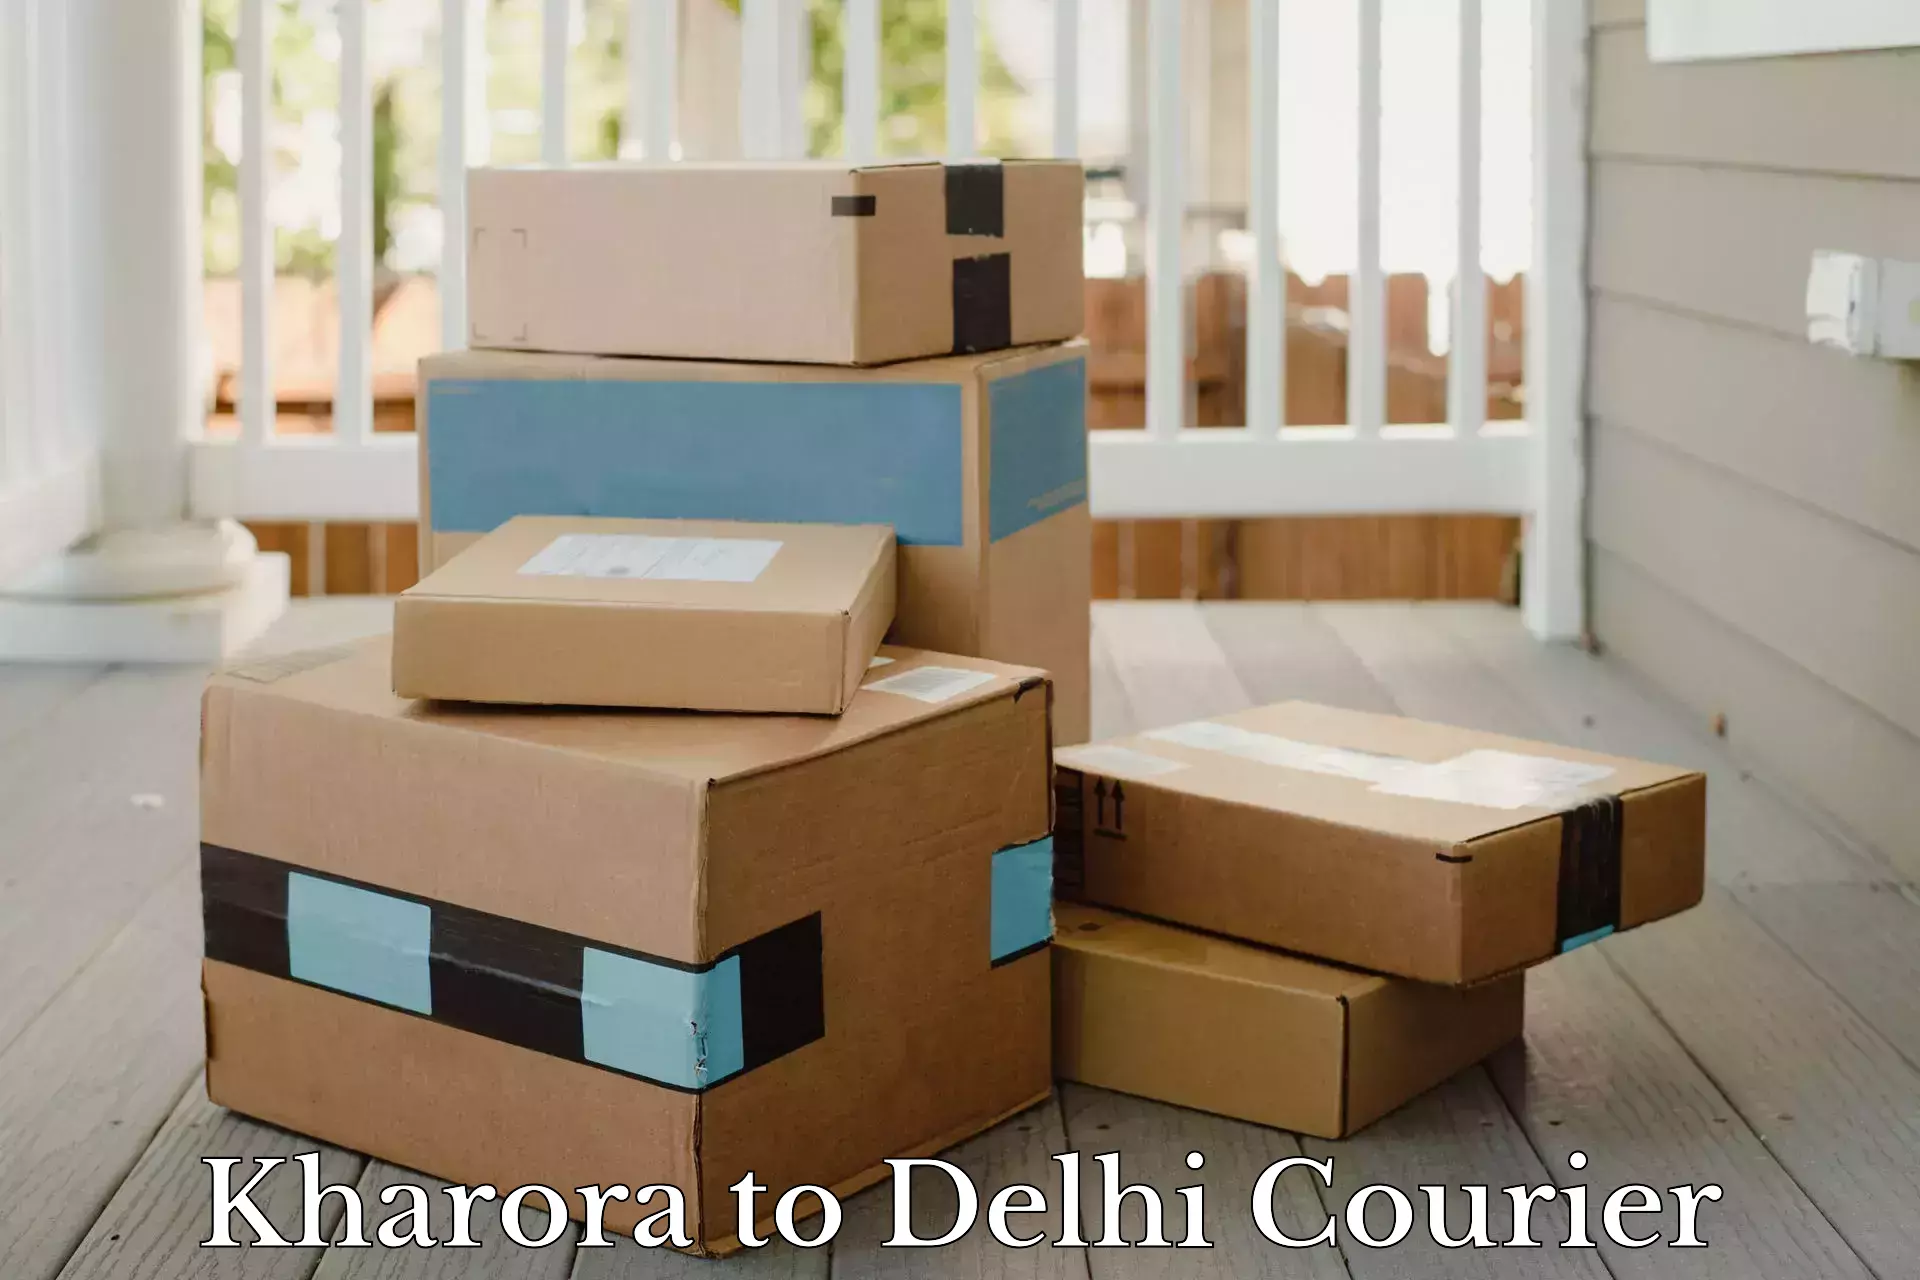 Professional parcel services Kharora to NCR